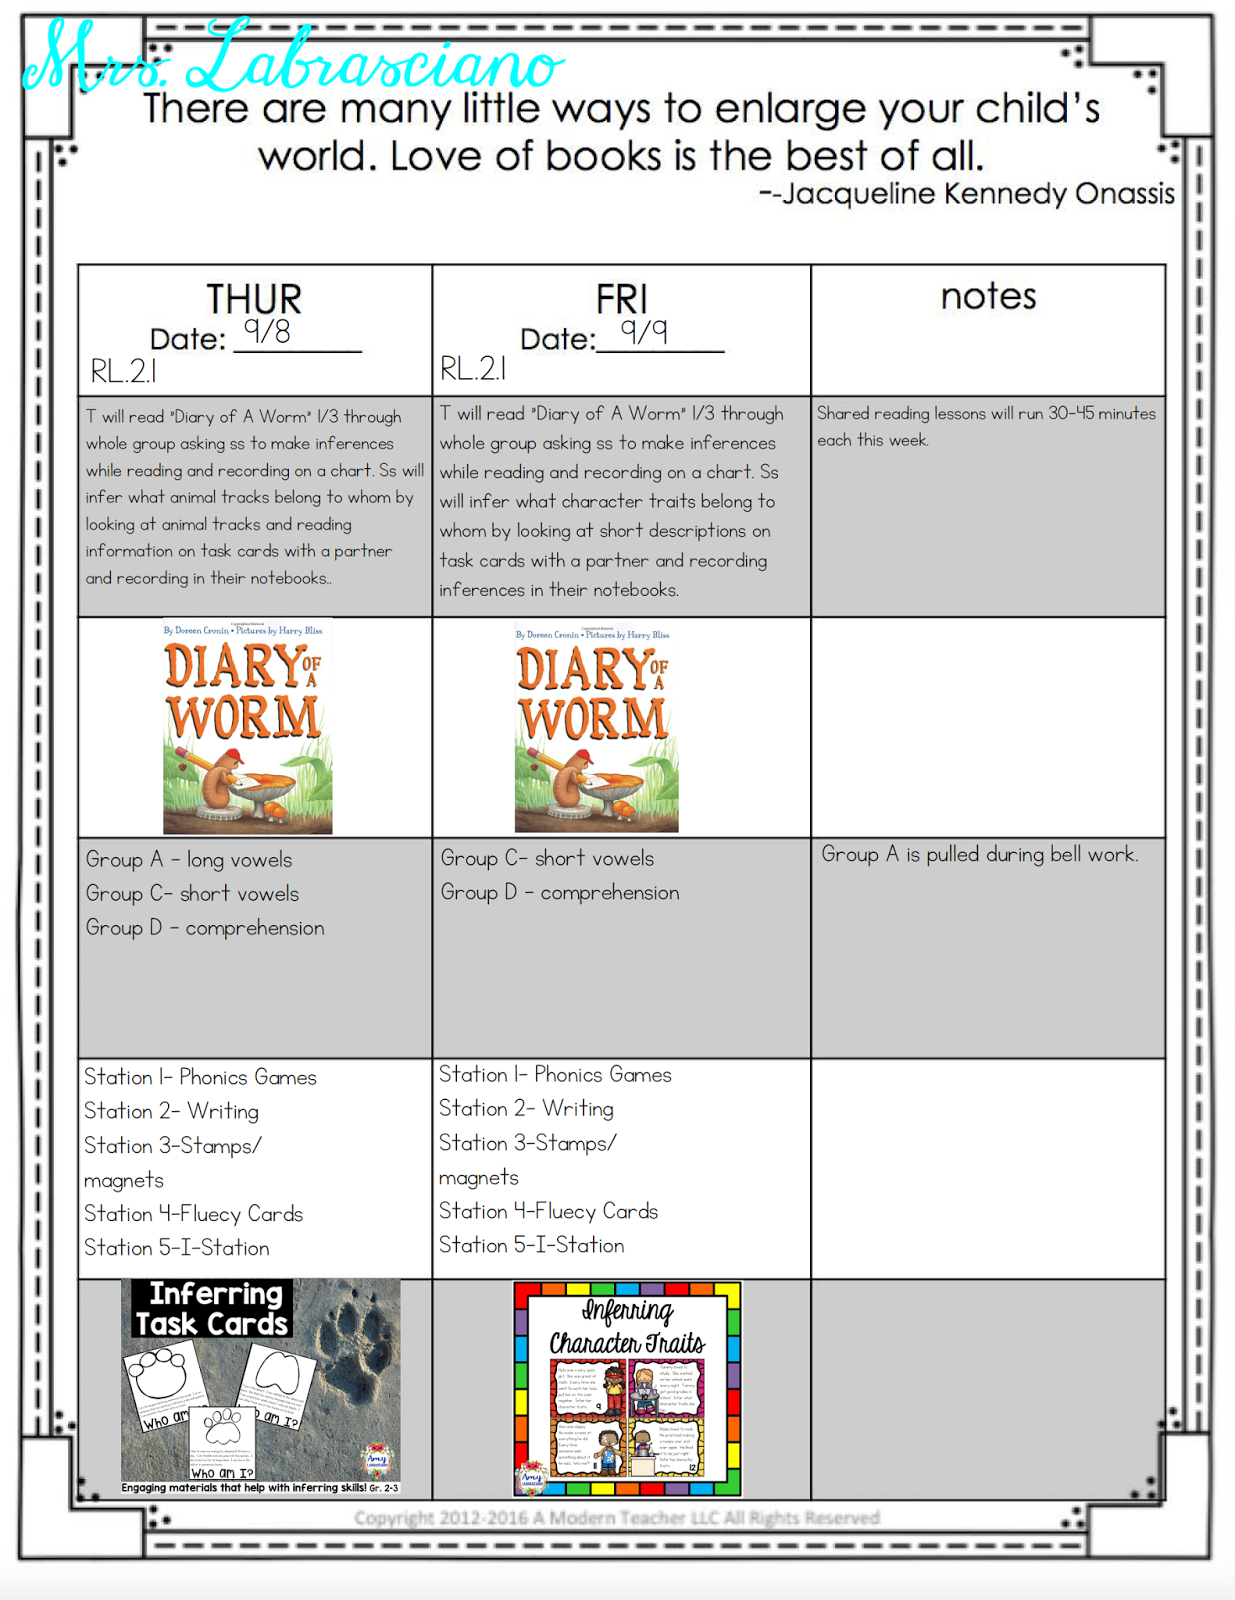 Learning Lessons With Amy Labrasciano: Inferring - ELA Lesson Plans #4